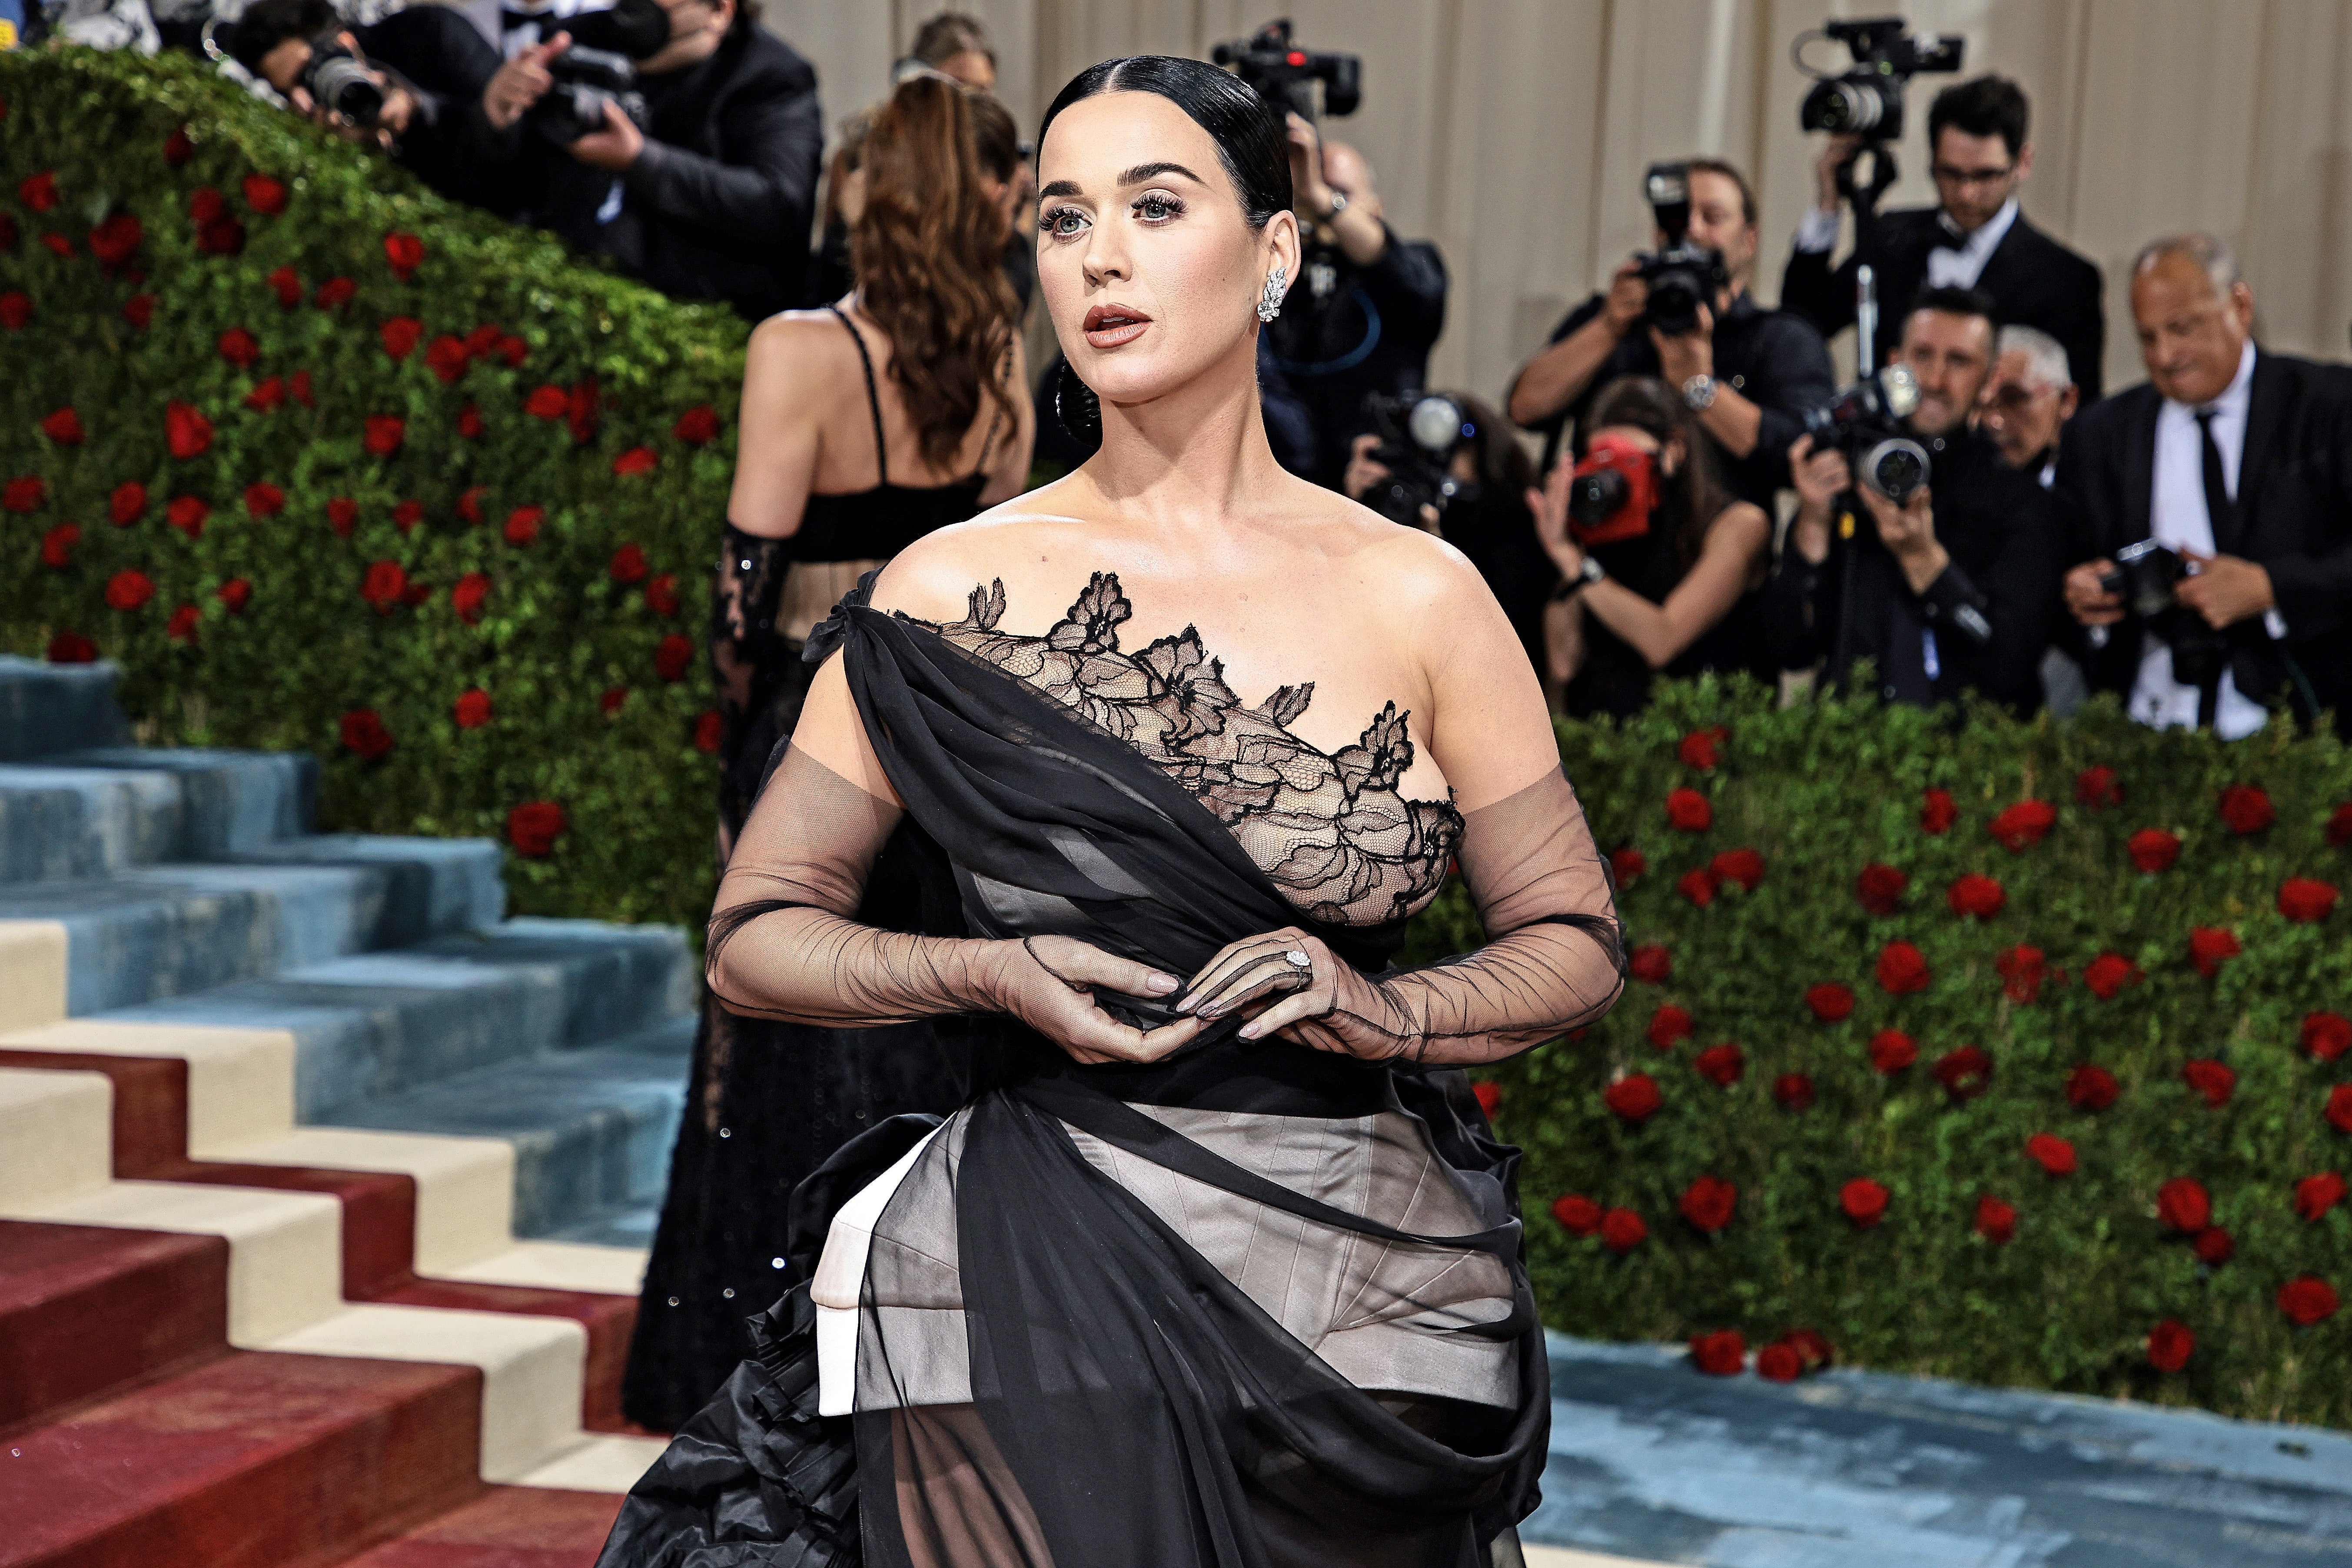 Katy Perry Blowjob Porn Captions - Katy Perry jokes about not being able to use restroom in Met Gala dress |  The Independent